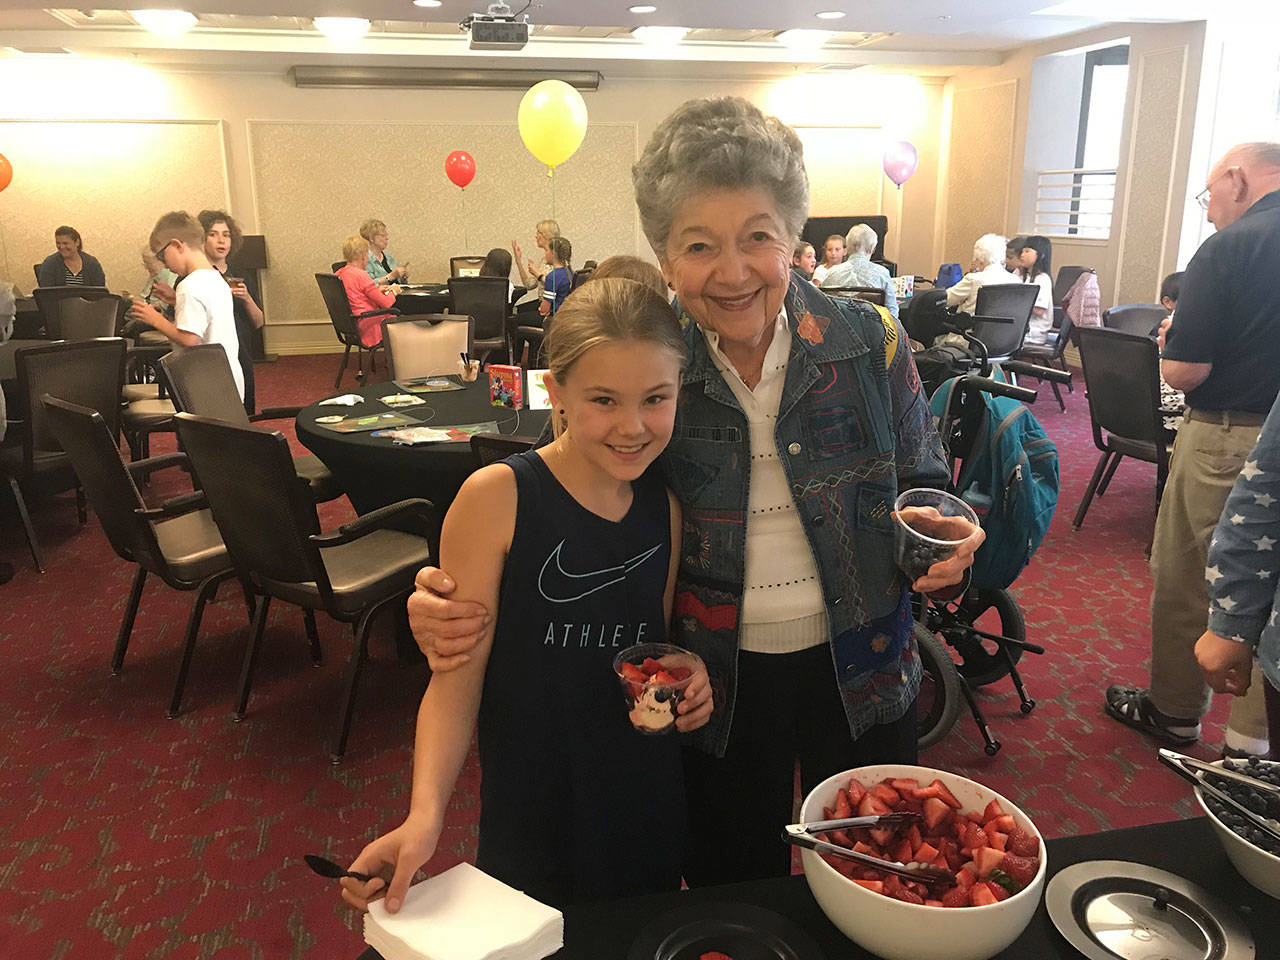 Lindsay Oliveira’s fourth grade class meets up with their pen pals at Aljoya for an end-of-the-year get together. Photos courtesy of Northwood Elementary